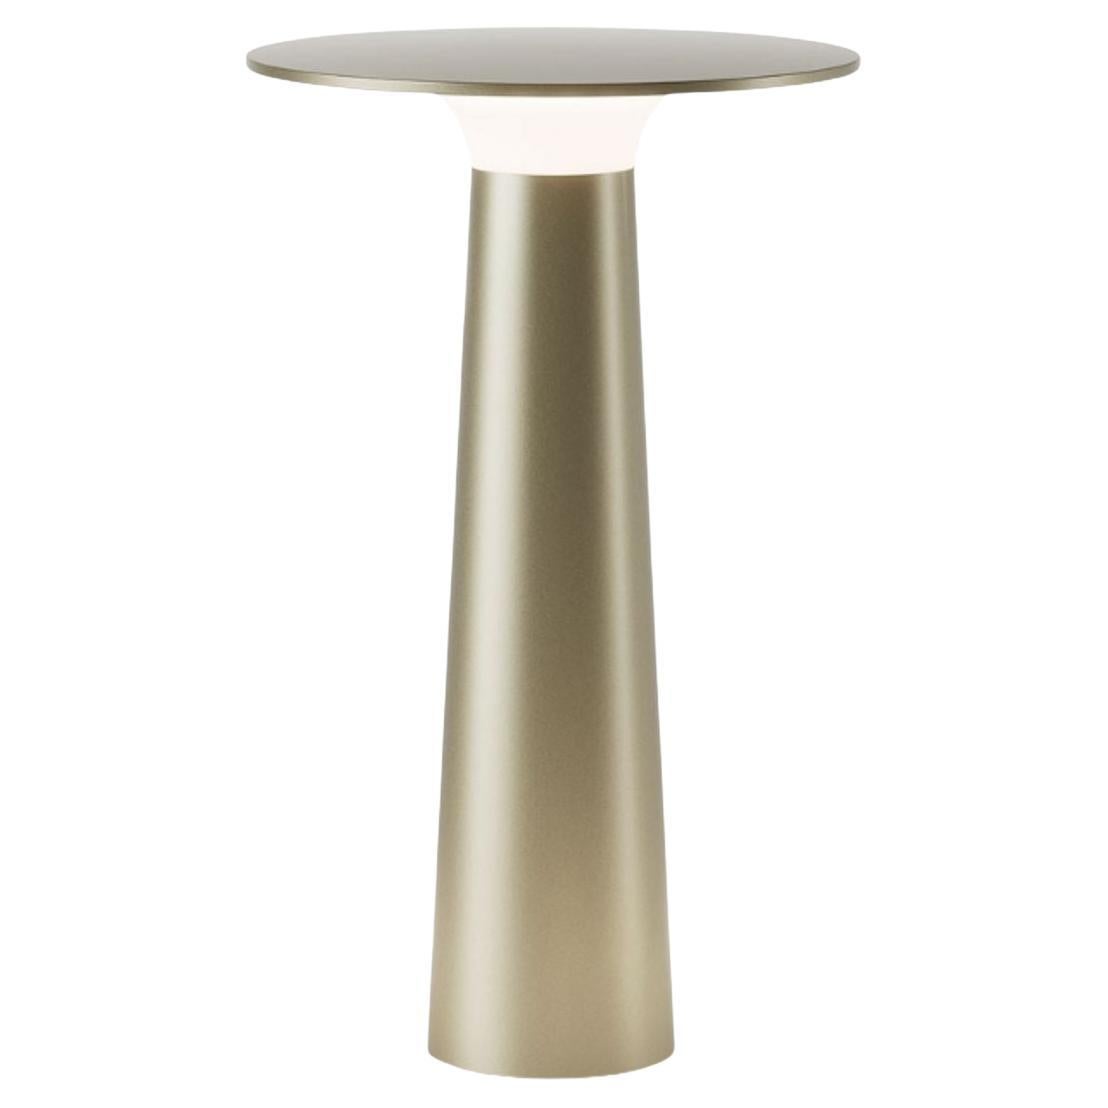 Klaus Nolting 'Lix' Portable Outdoor Aluminum Table Lamp in Gold for IP44de For Sale